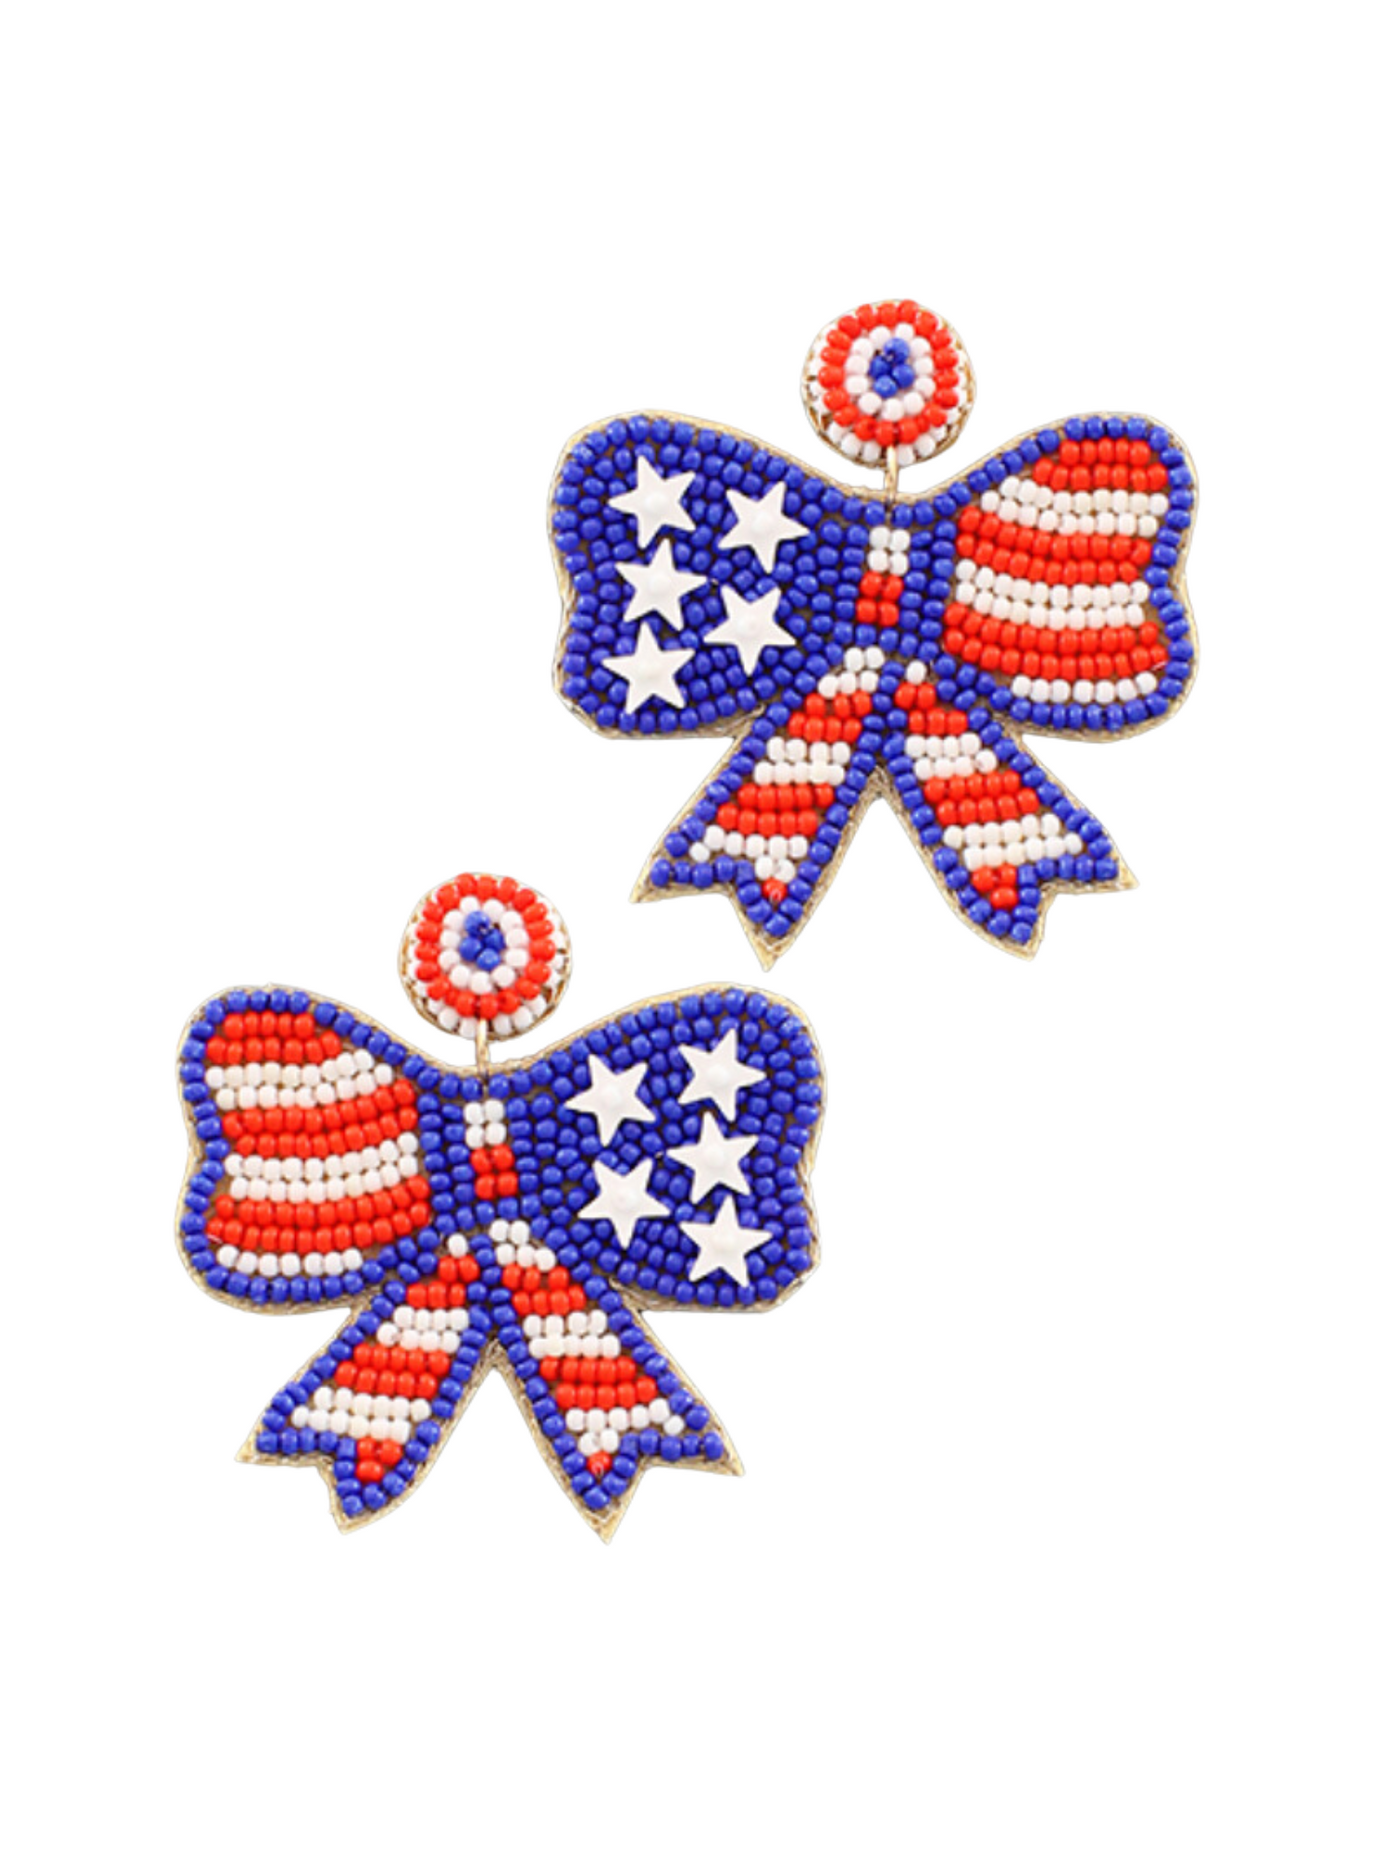 Patriotic Bow Earrings on white background.